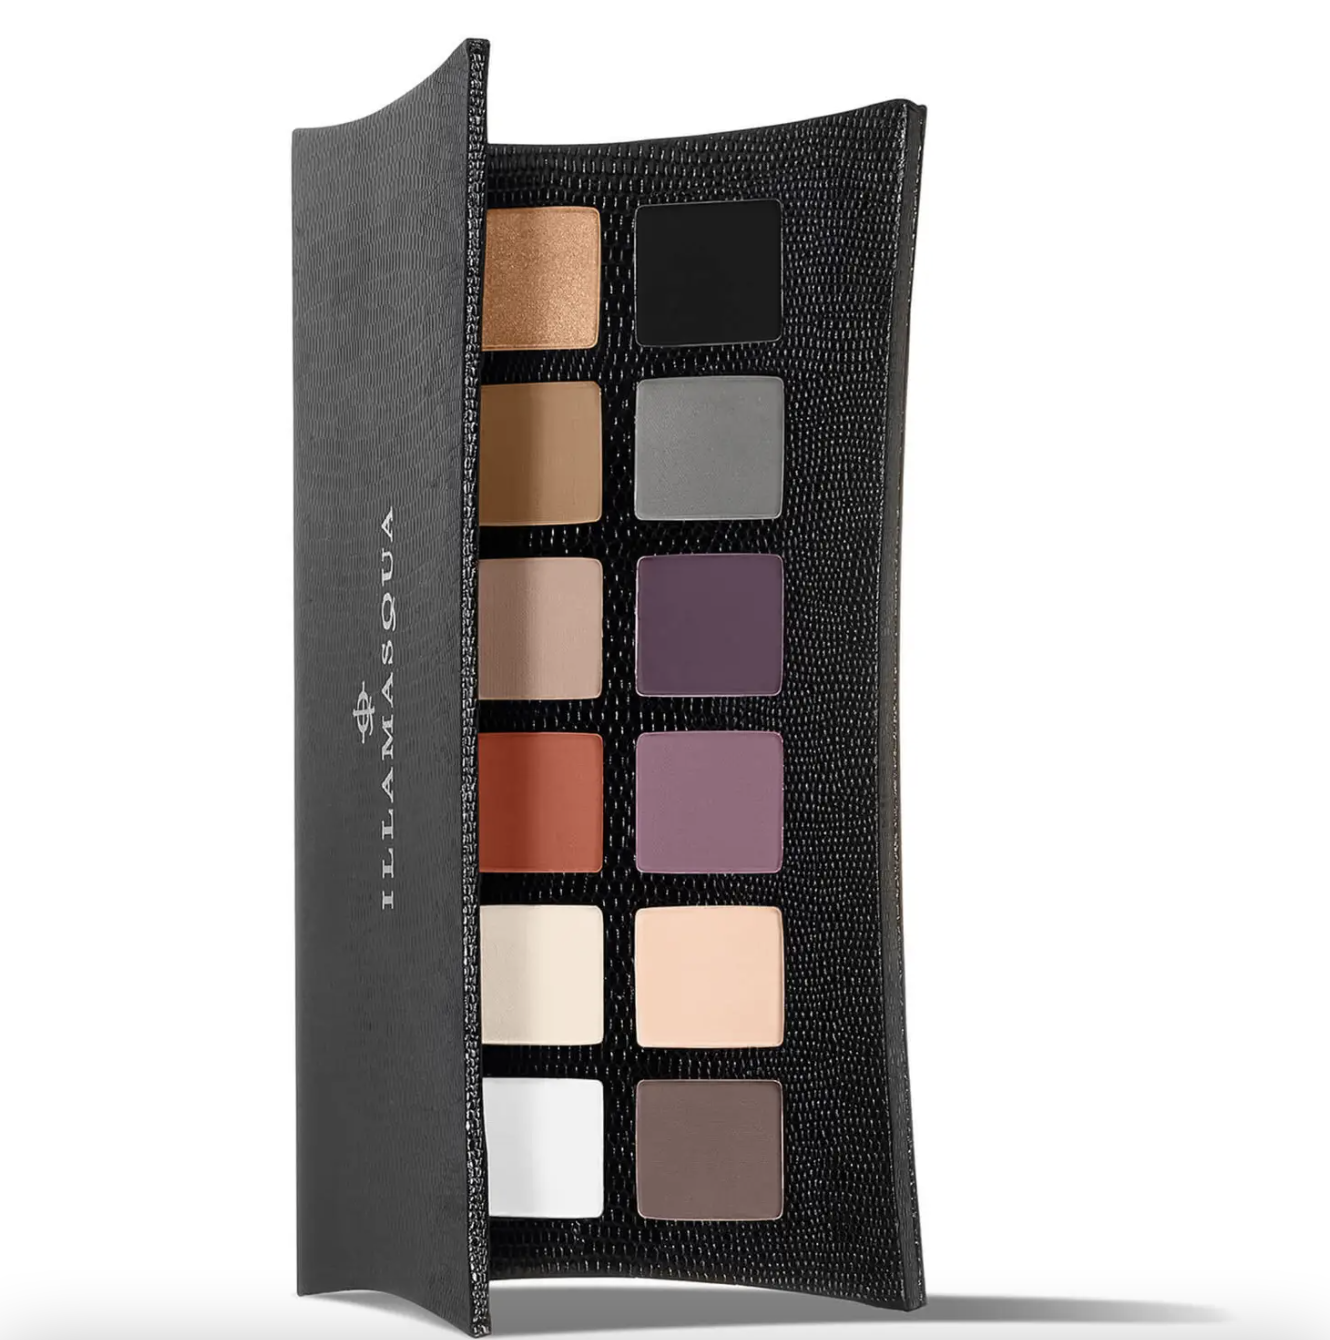 the artistry palette from illamasqua